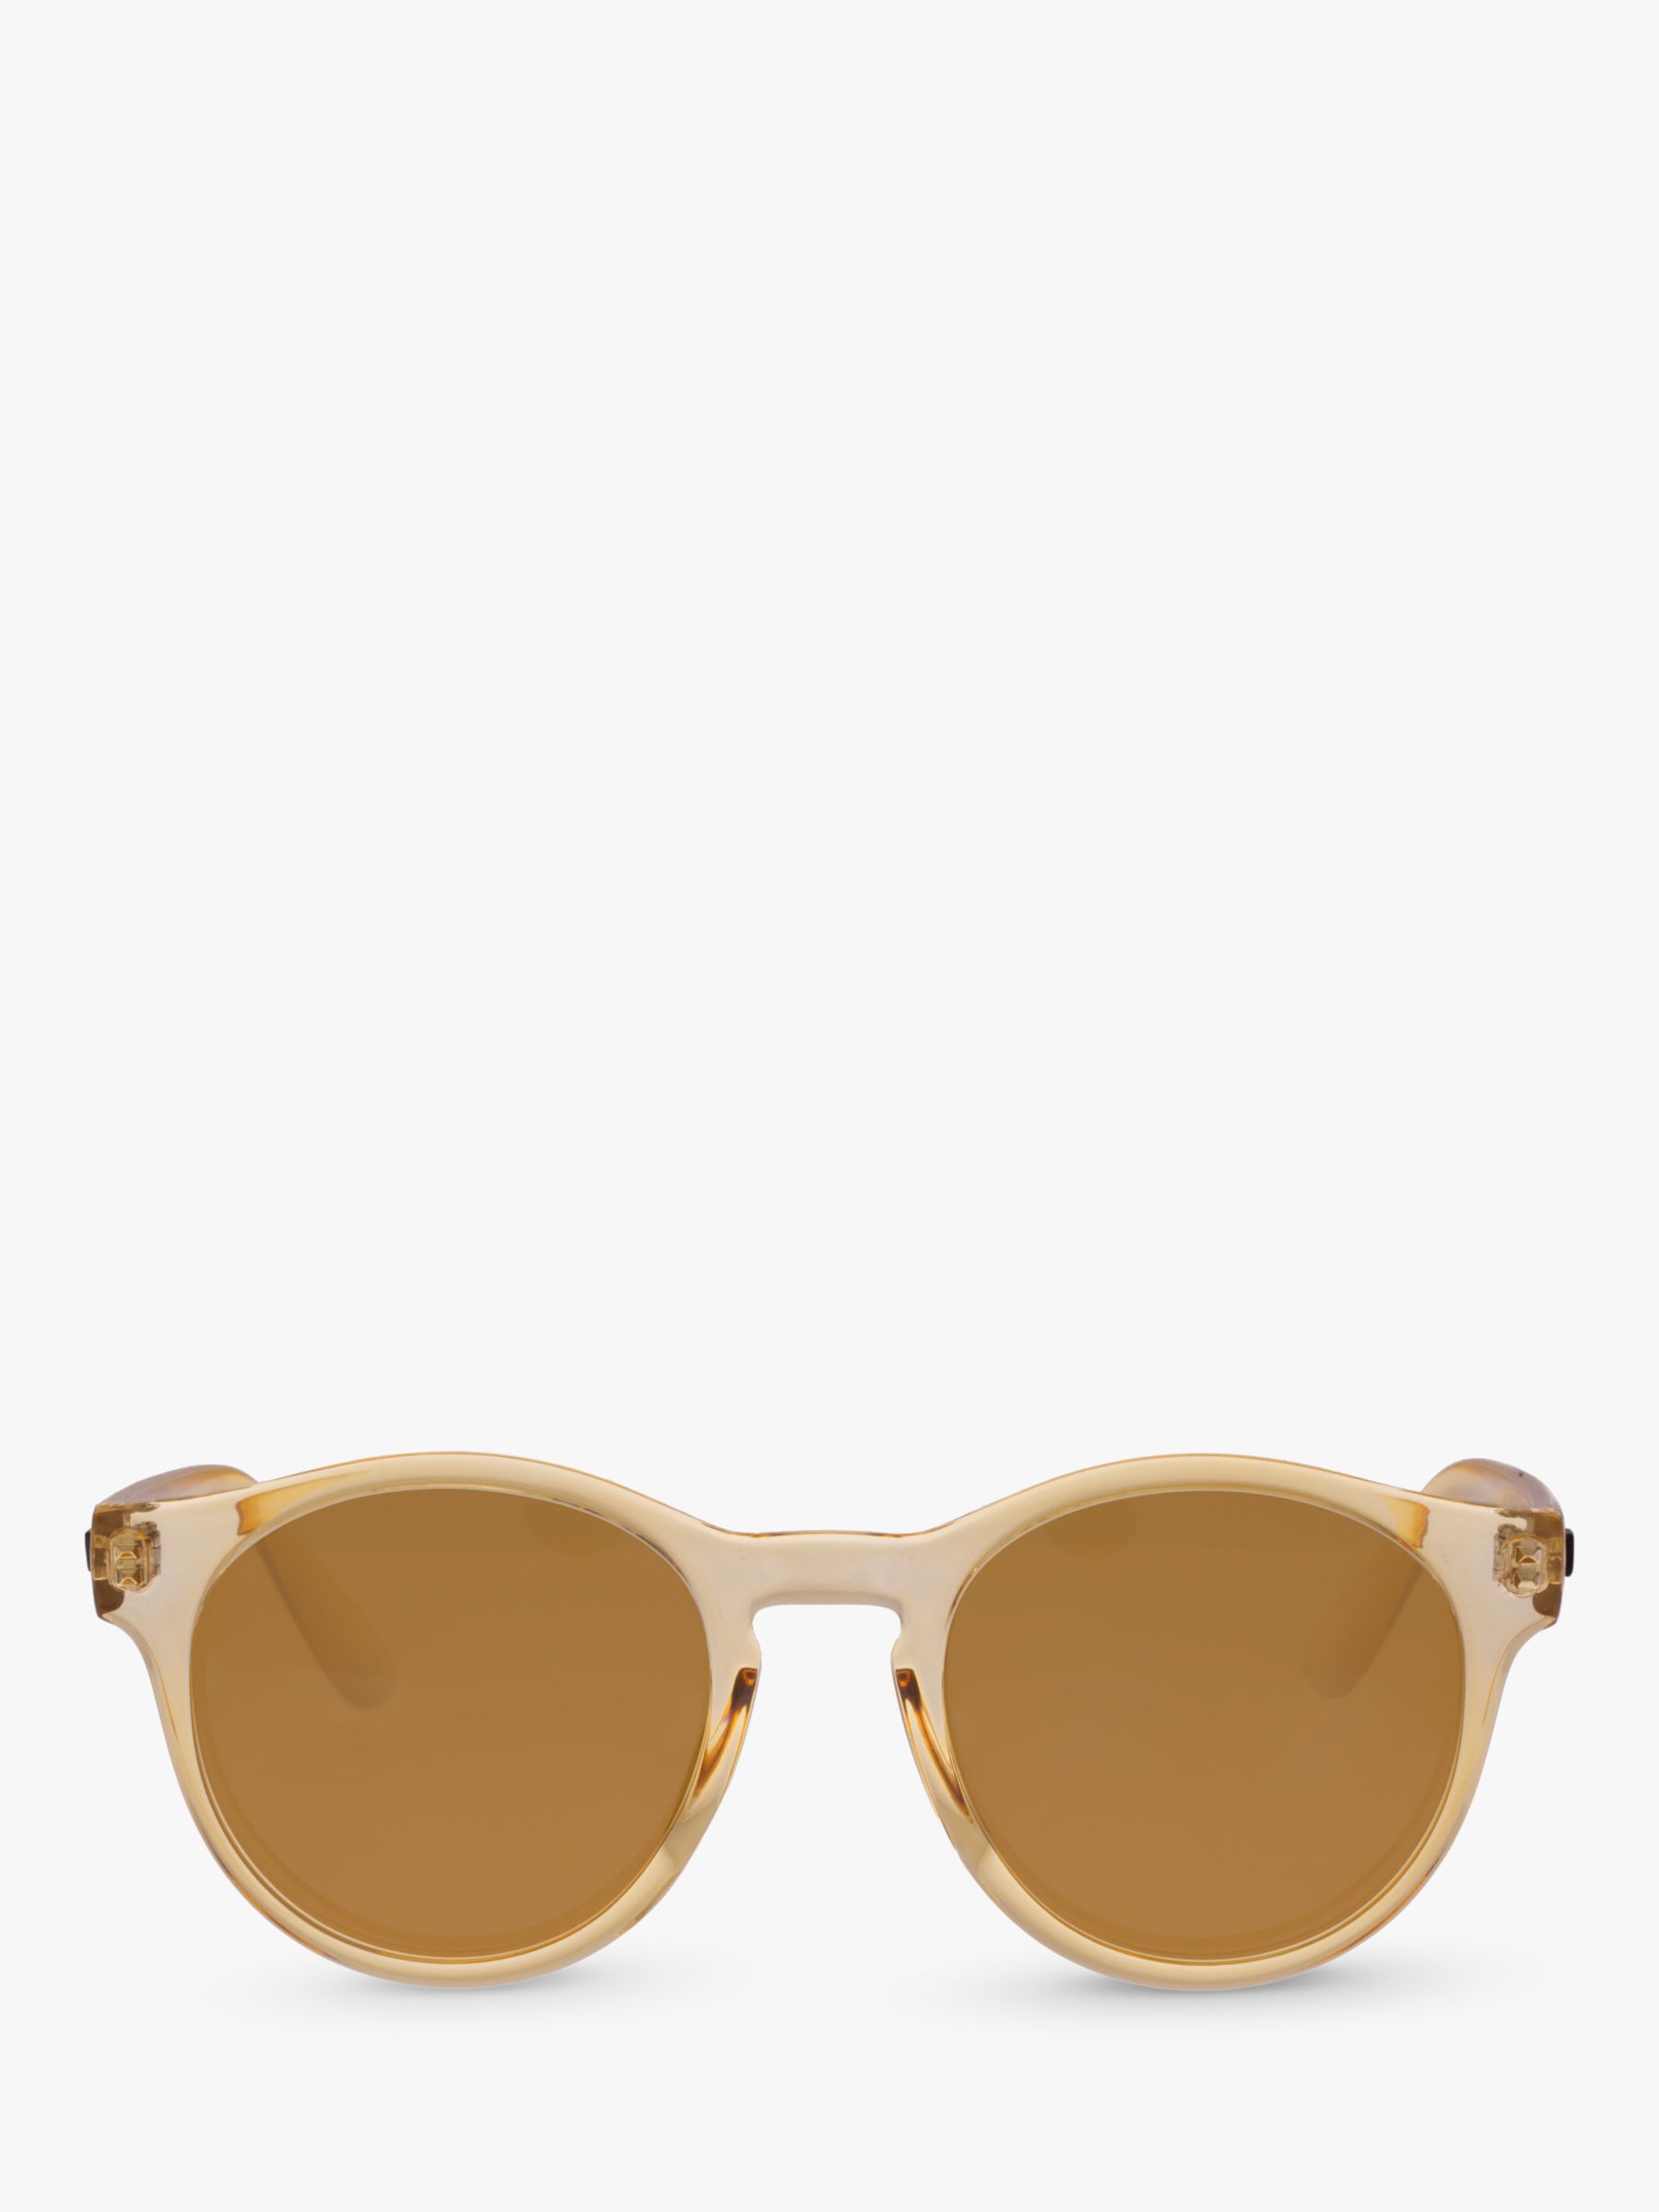 Buy Le Specs L5000173 Hey Macarena Polarised Round Sunglasses, Clear Brown/Tan Online at johnlewis.com